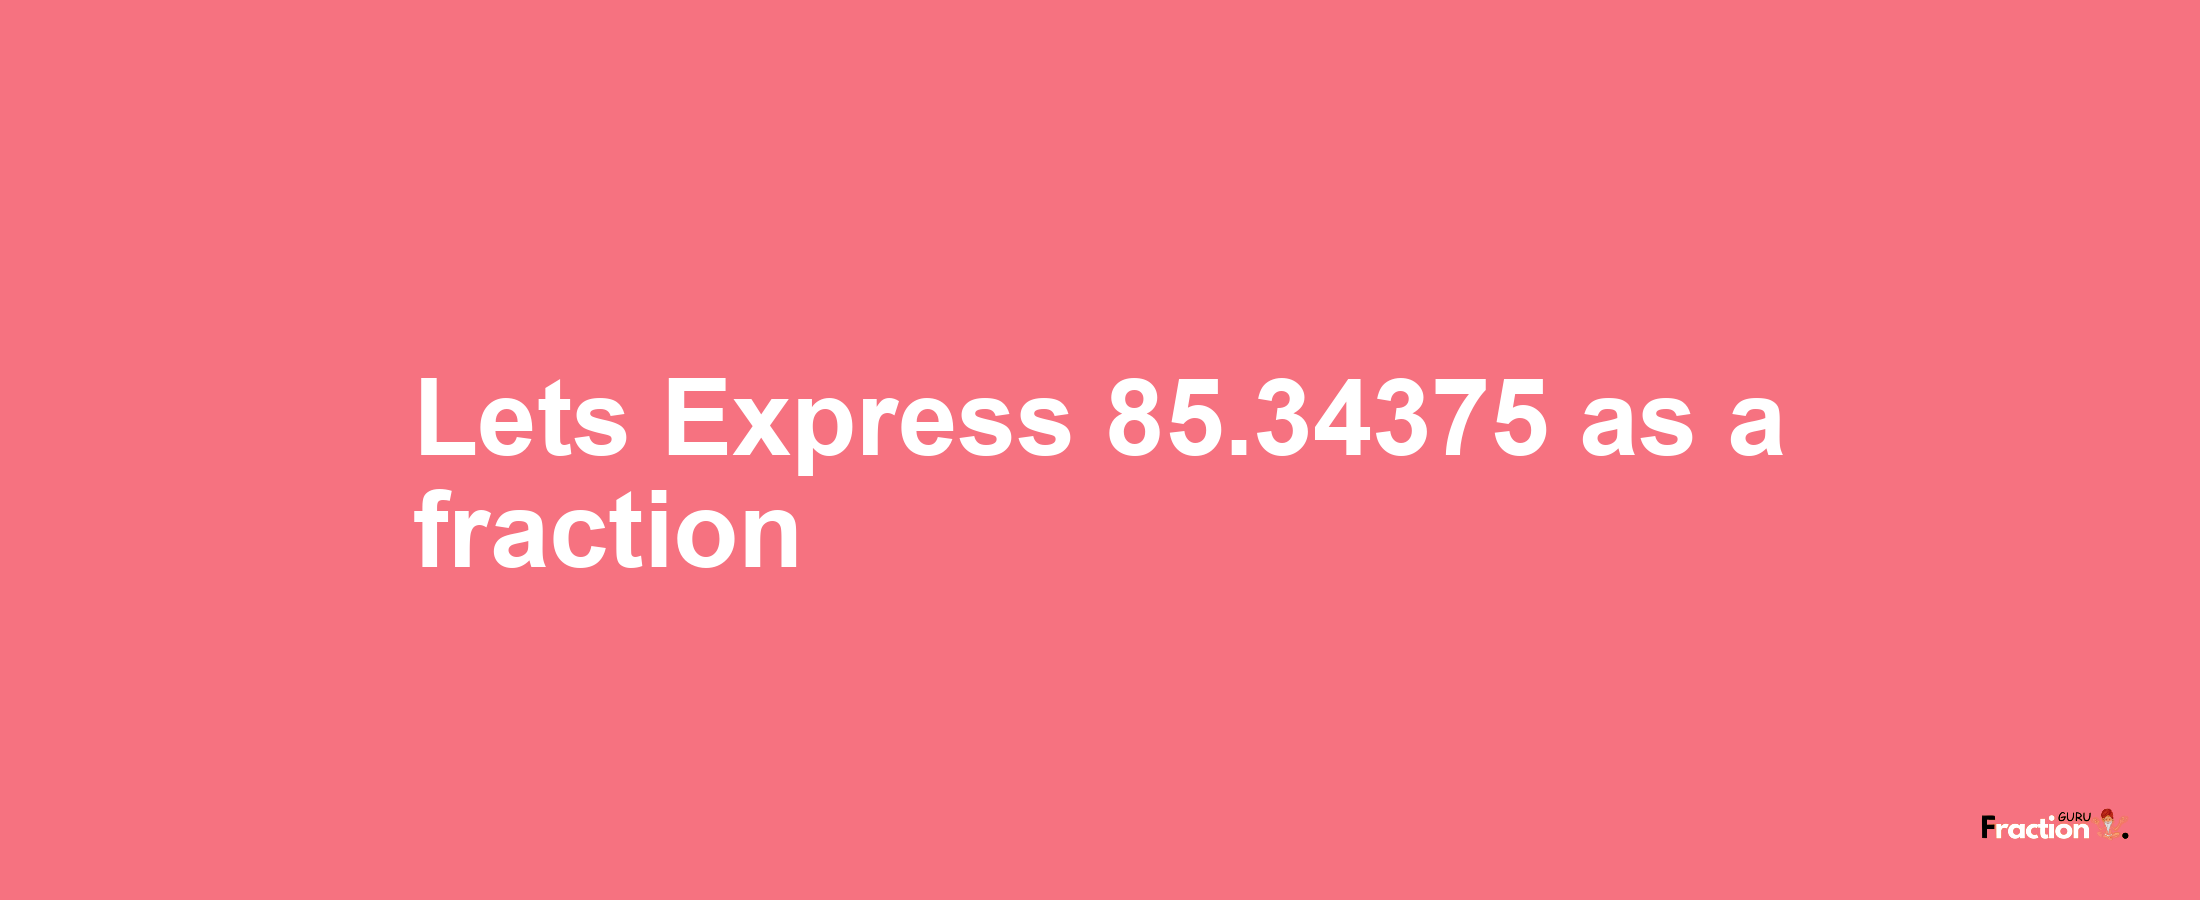 Lets Express 85.34375 as afraction